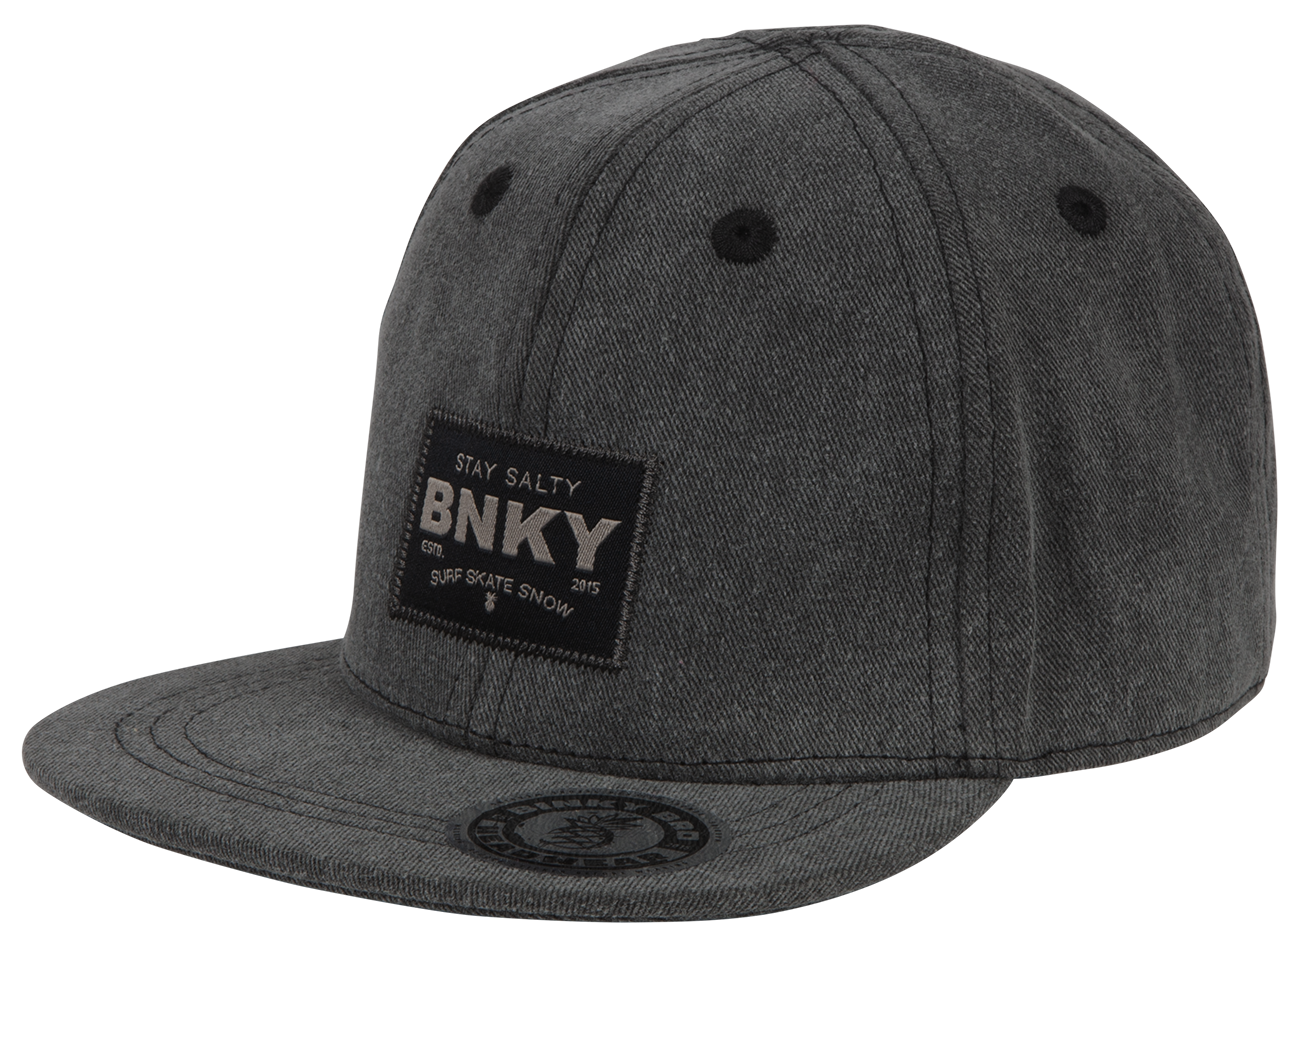 Torrey Pines Hat: Toddler (12 months - 3 years) / charcoal / Standard Fit